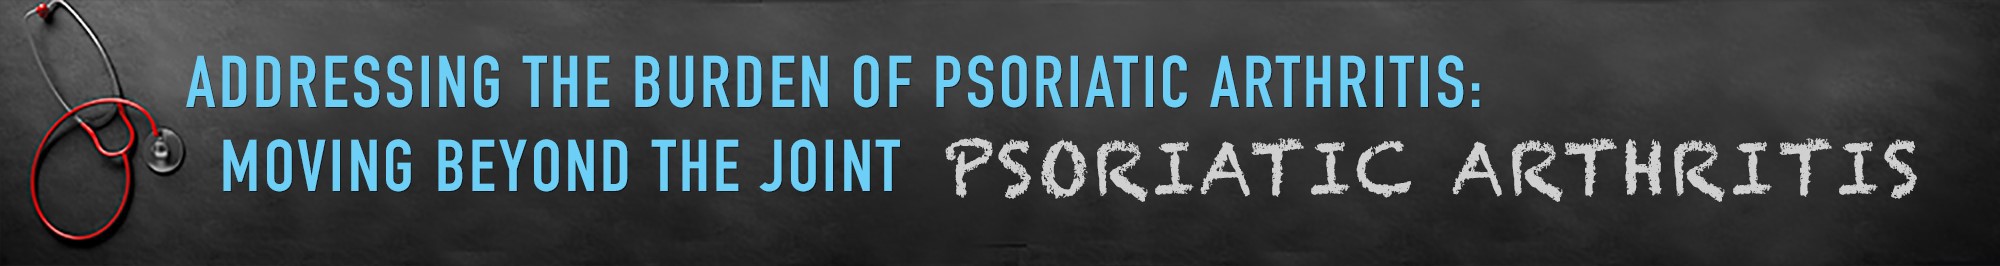 Addressing the Burden of Psoriatic Arthritis: Moving Beyond the Joint